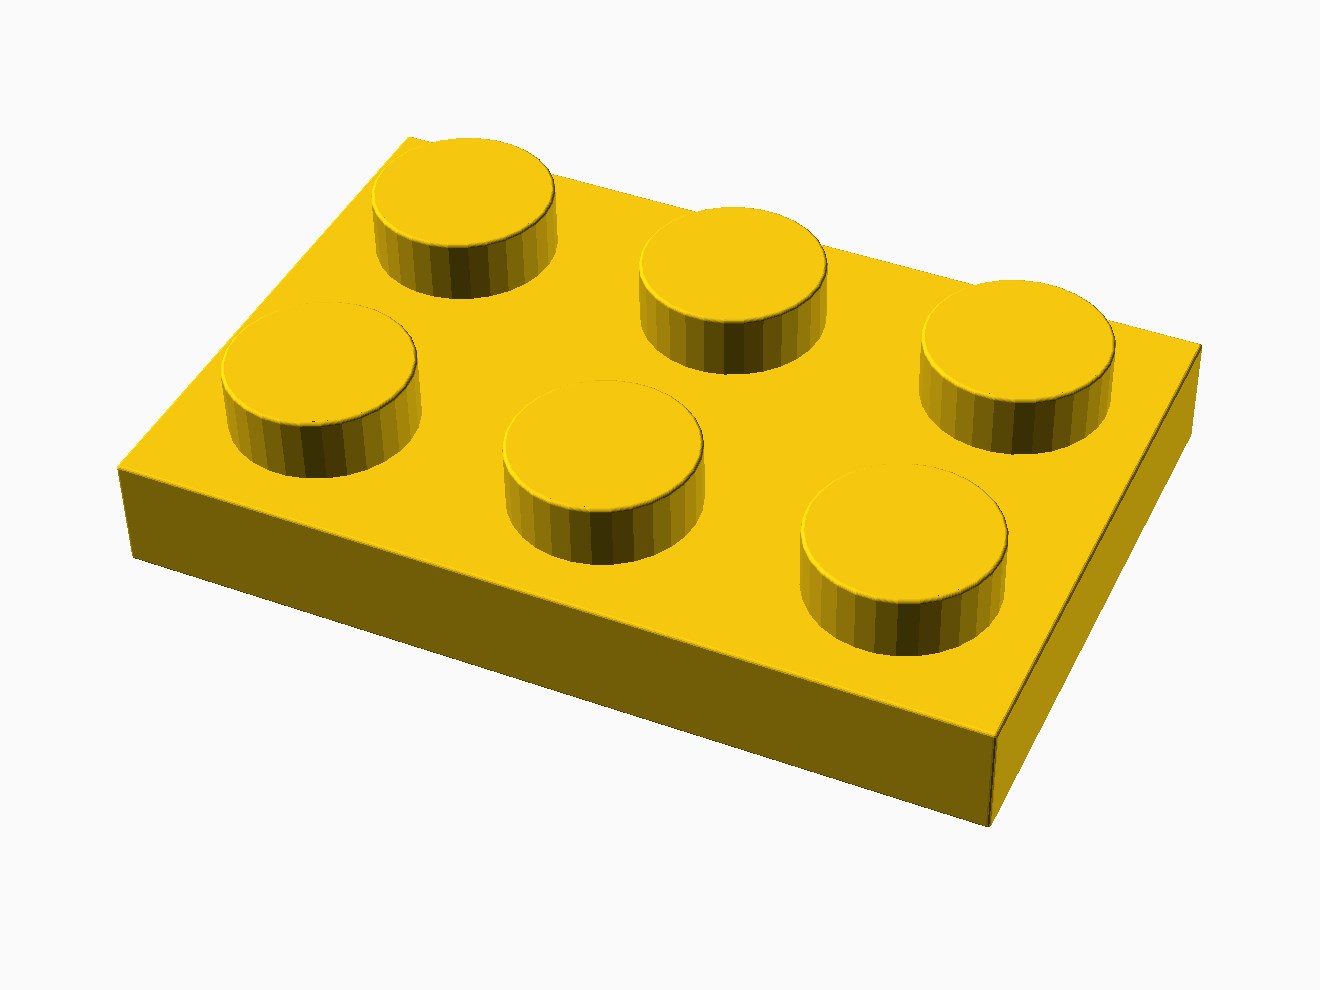 3D printable model of a LEGO 3x2 Plate with standard knobs.